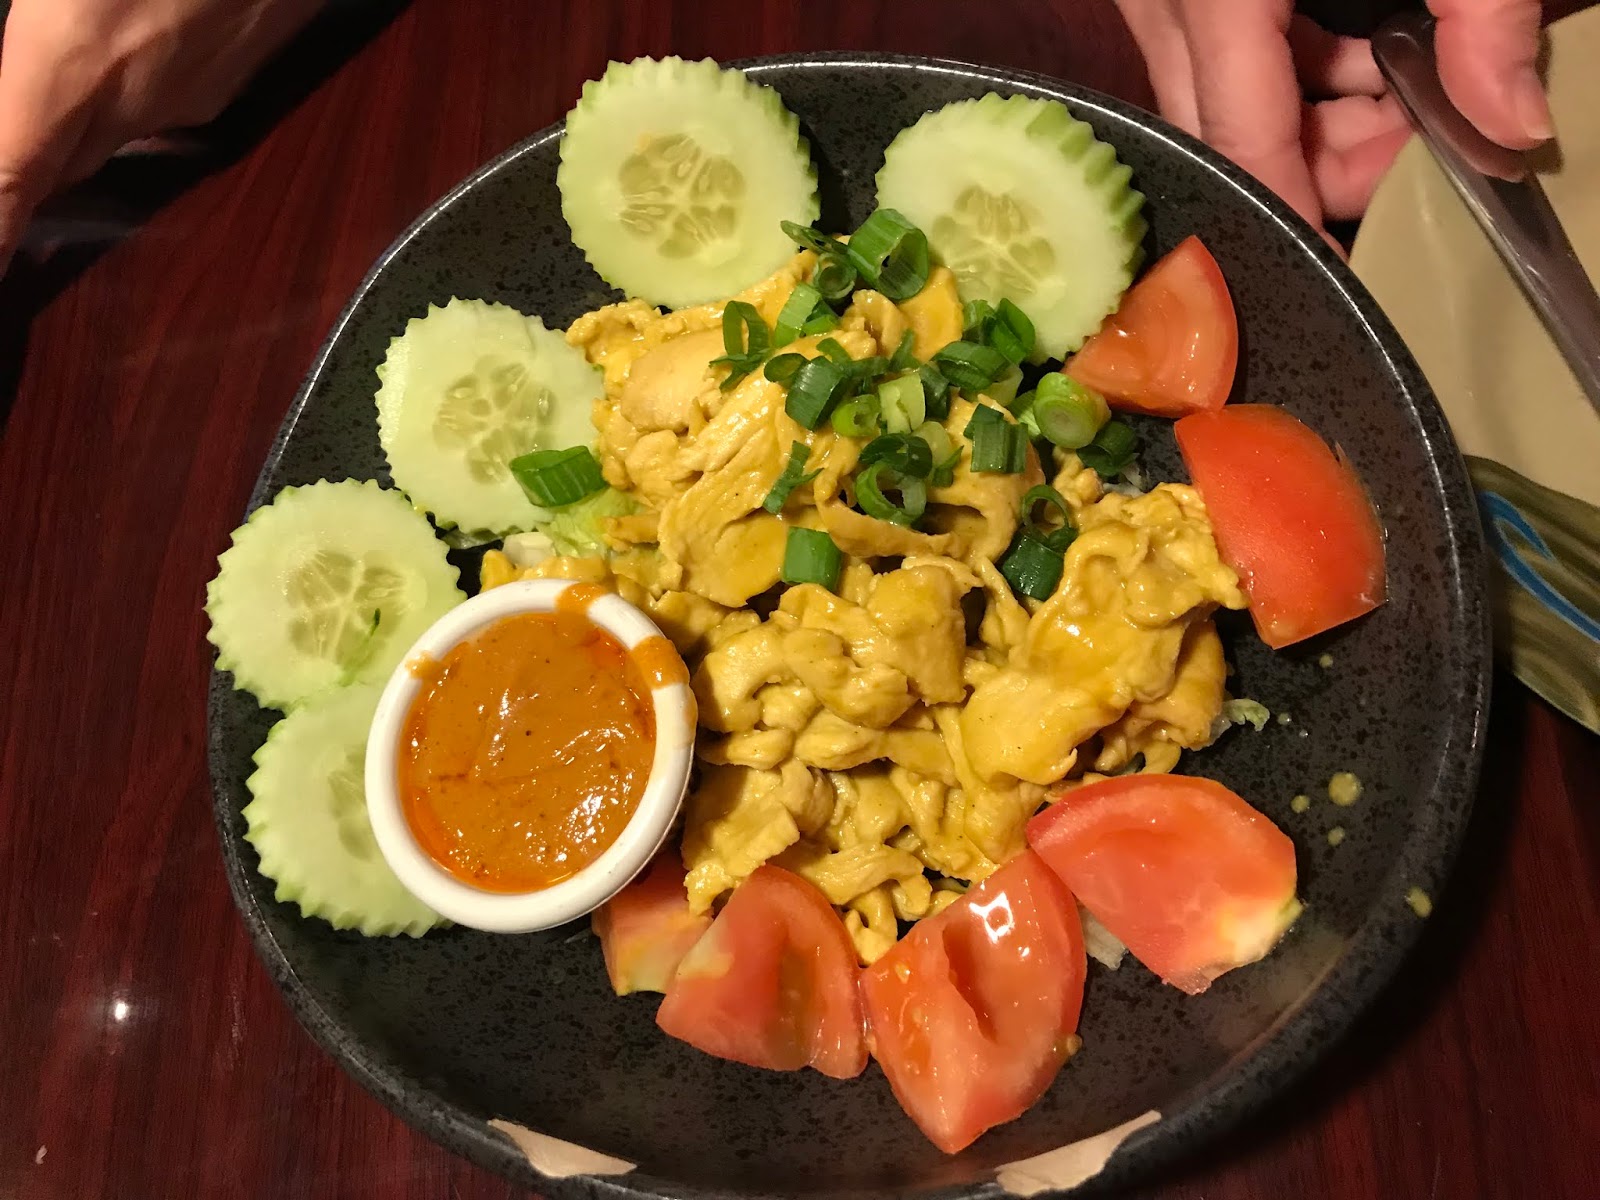 The Pastry Chef's Baking: Restaurant Review: Thai Spice, Kansas City (Lee's  Summit), MO